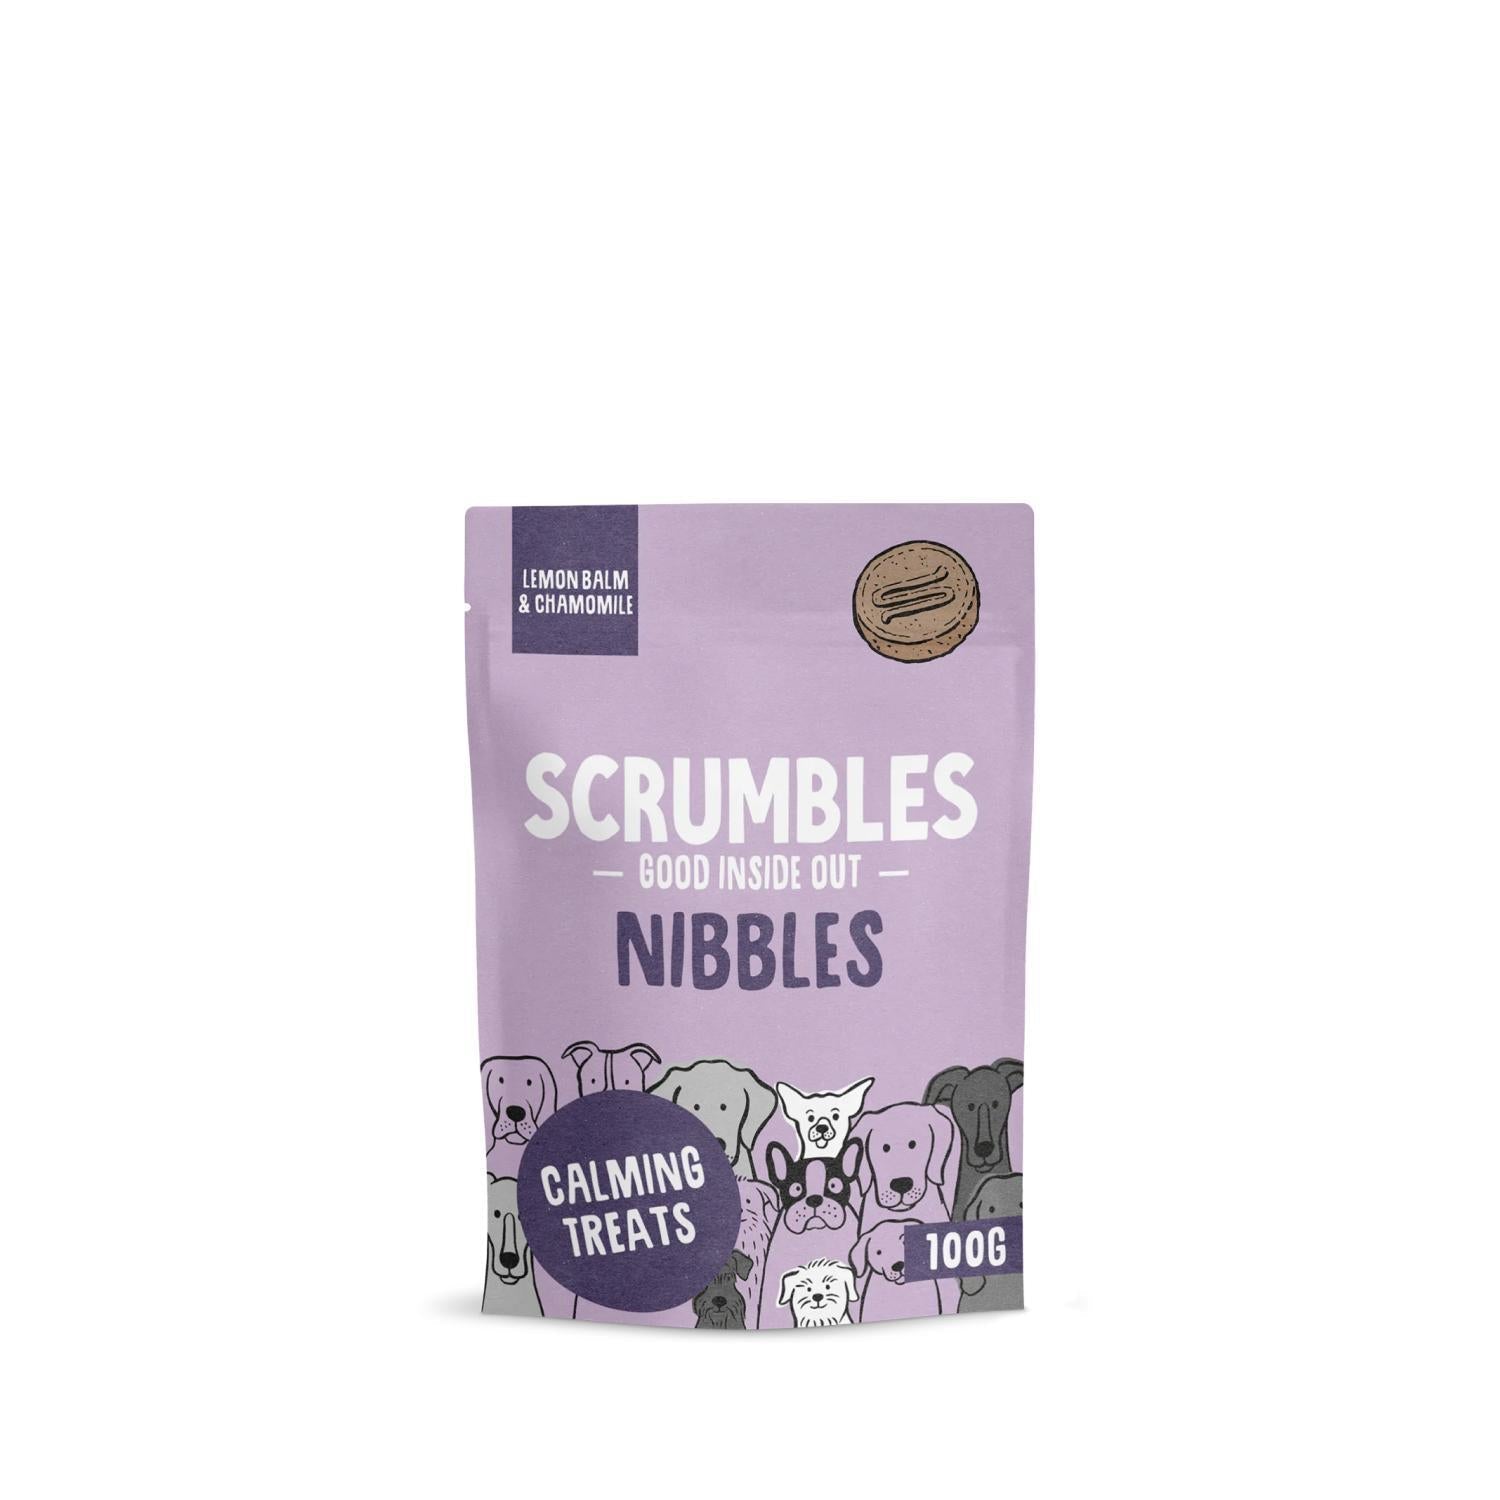 Scrumbles - Gnashers